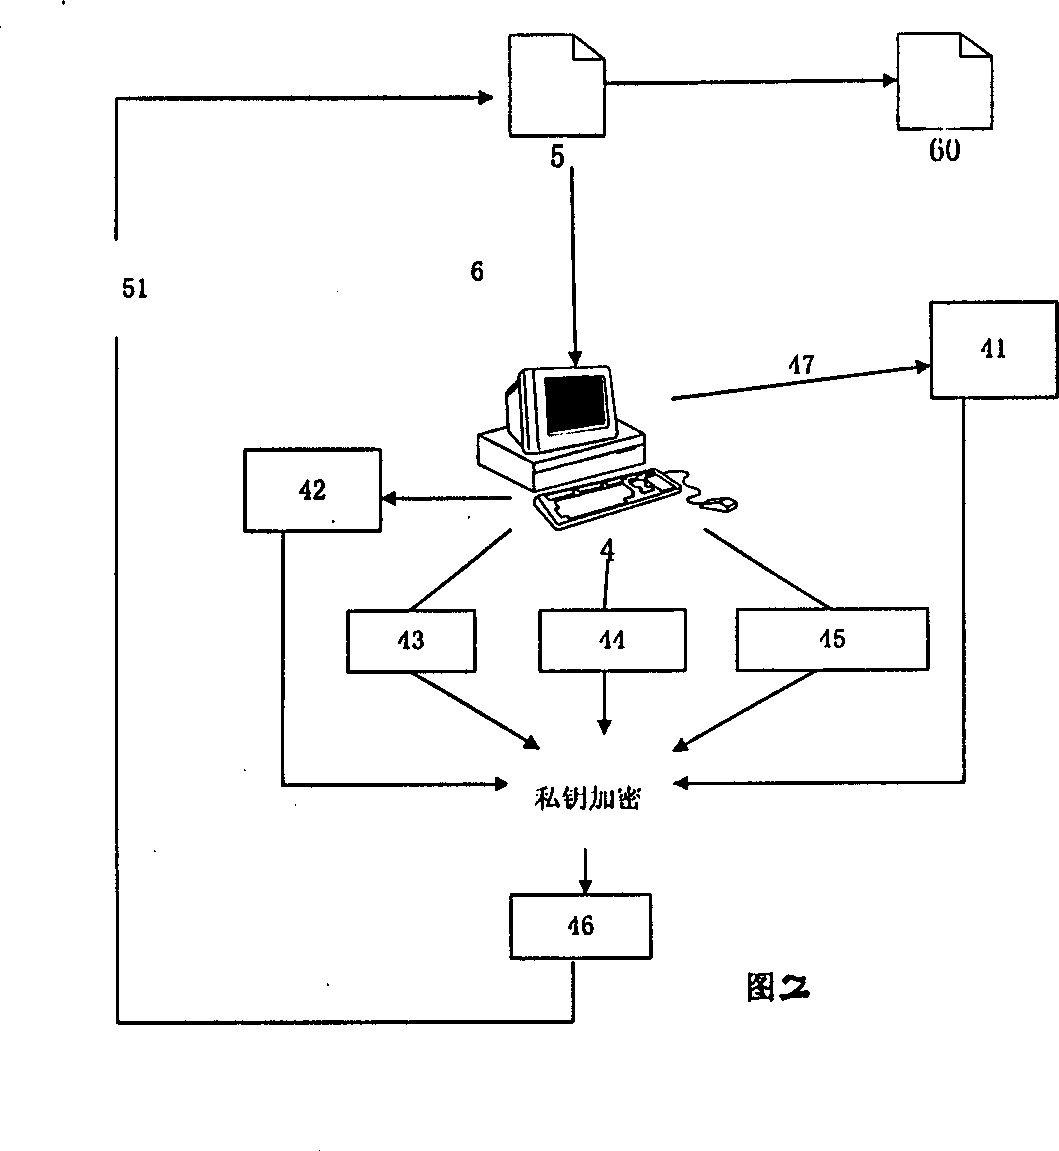 Hierarchical network information content managing method based on public key basic facilities